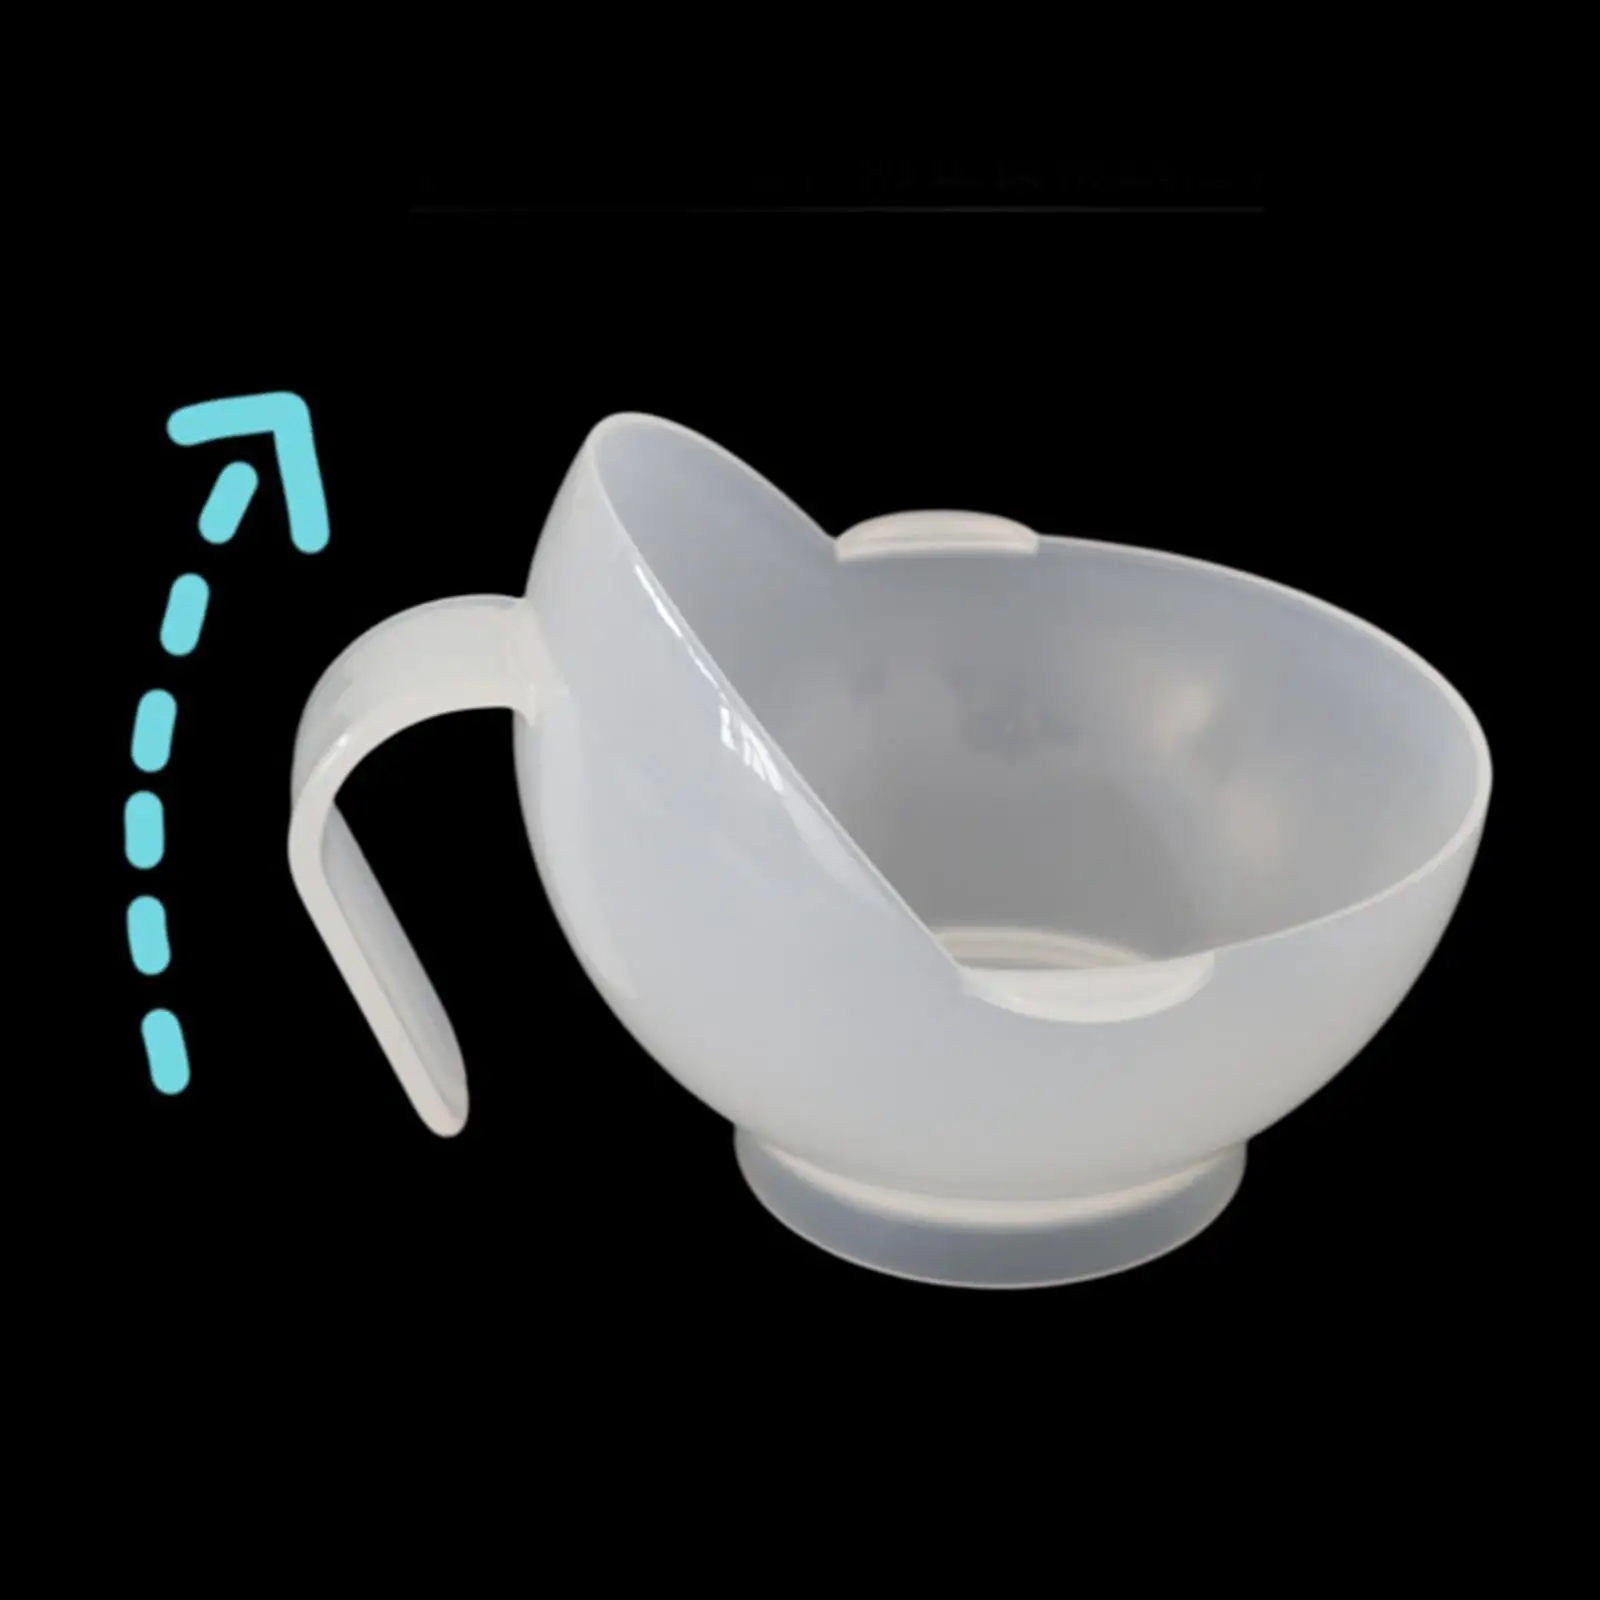 Spill Proof Scoop Bowl Adaptive Equipment Spill Proof Adaptive Bowl Bowl with Suction Cup Base Adults Elderly